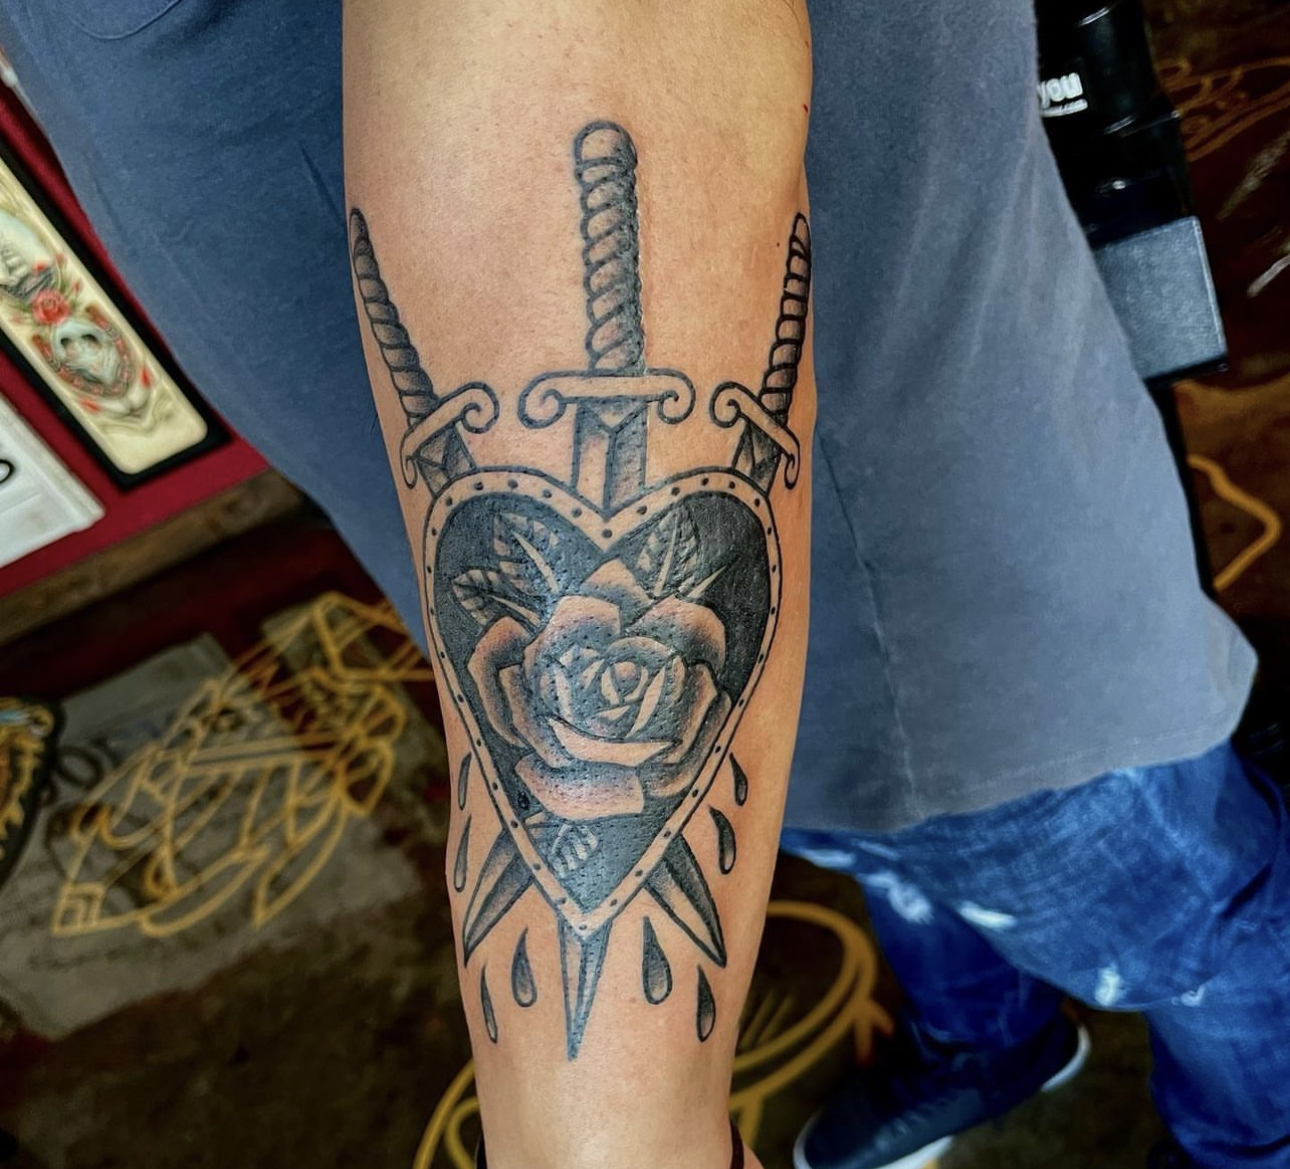 tattoo of a heart and swords from coverup